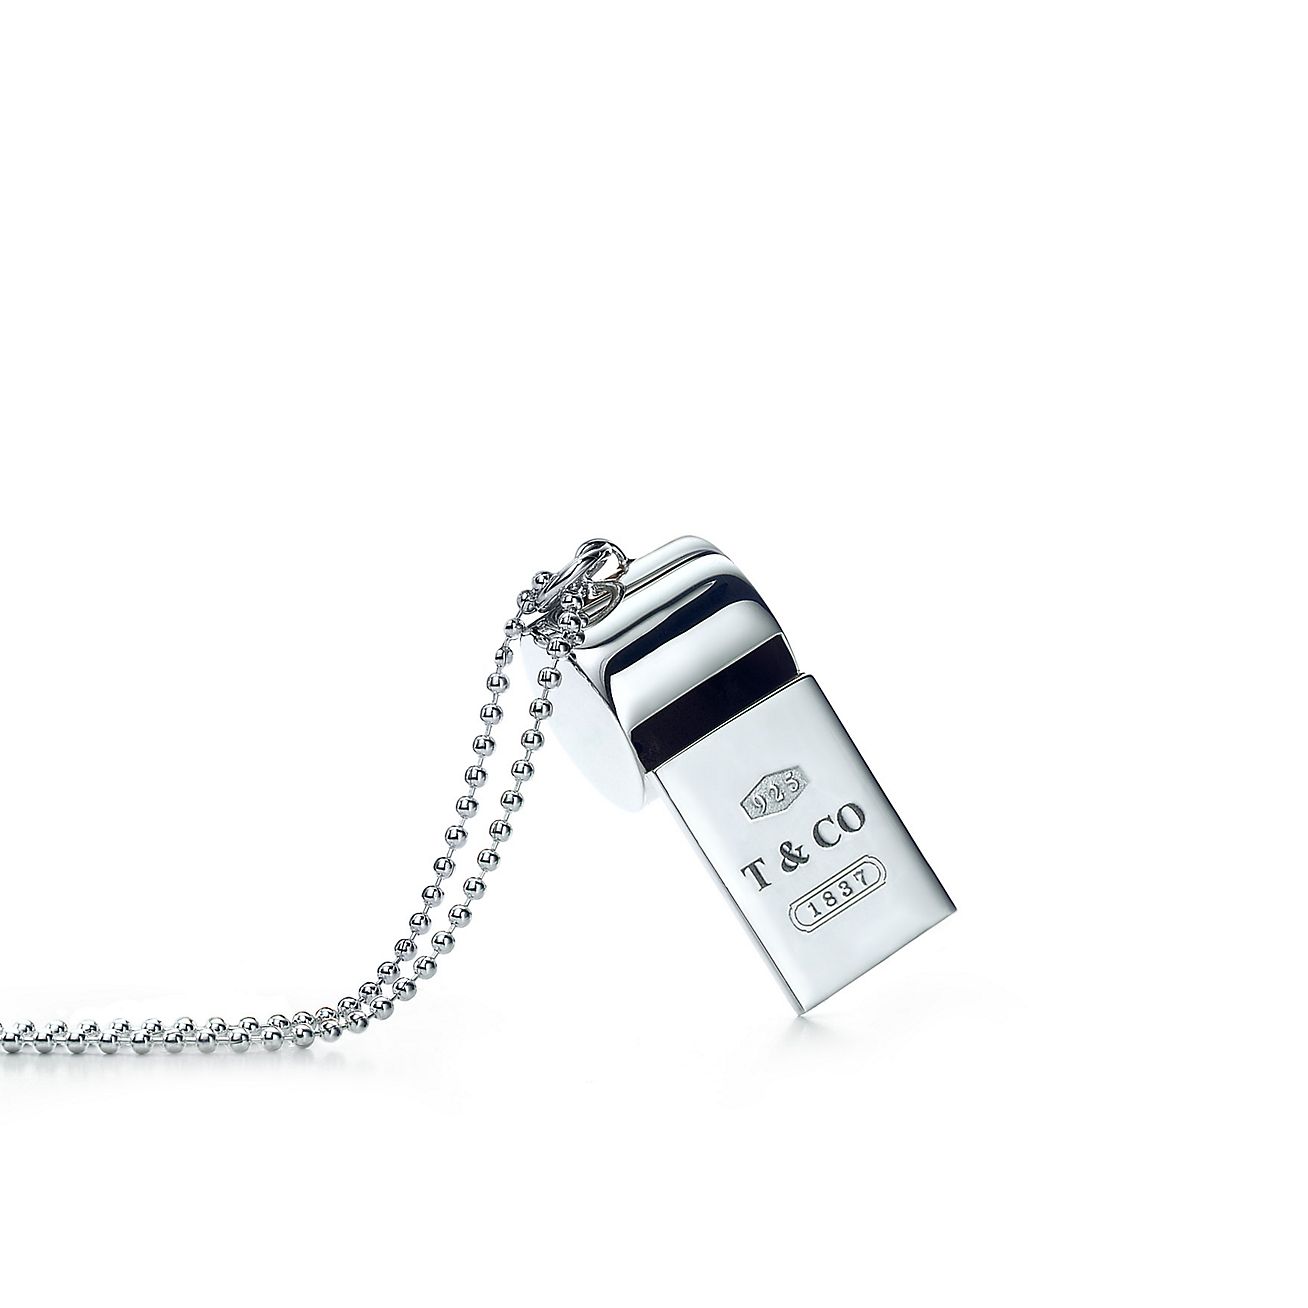 Tiffany 1837® whistle in sterling 